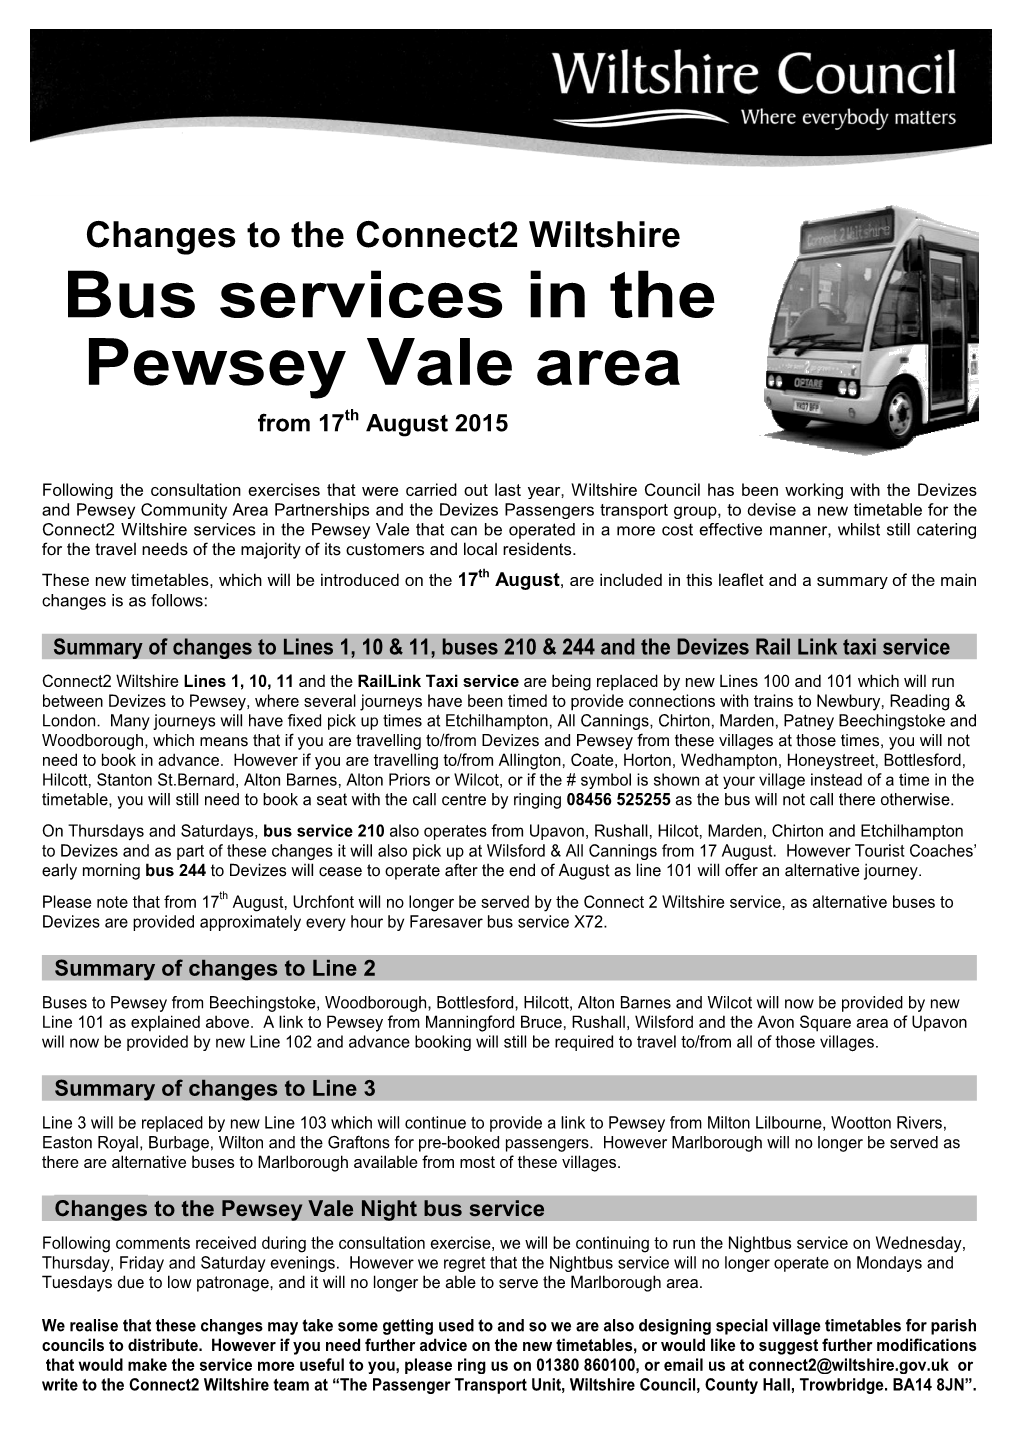 Bus Services in the Pewsey Vale Area